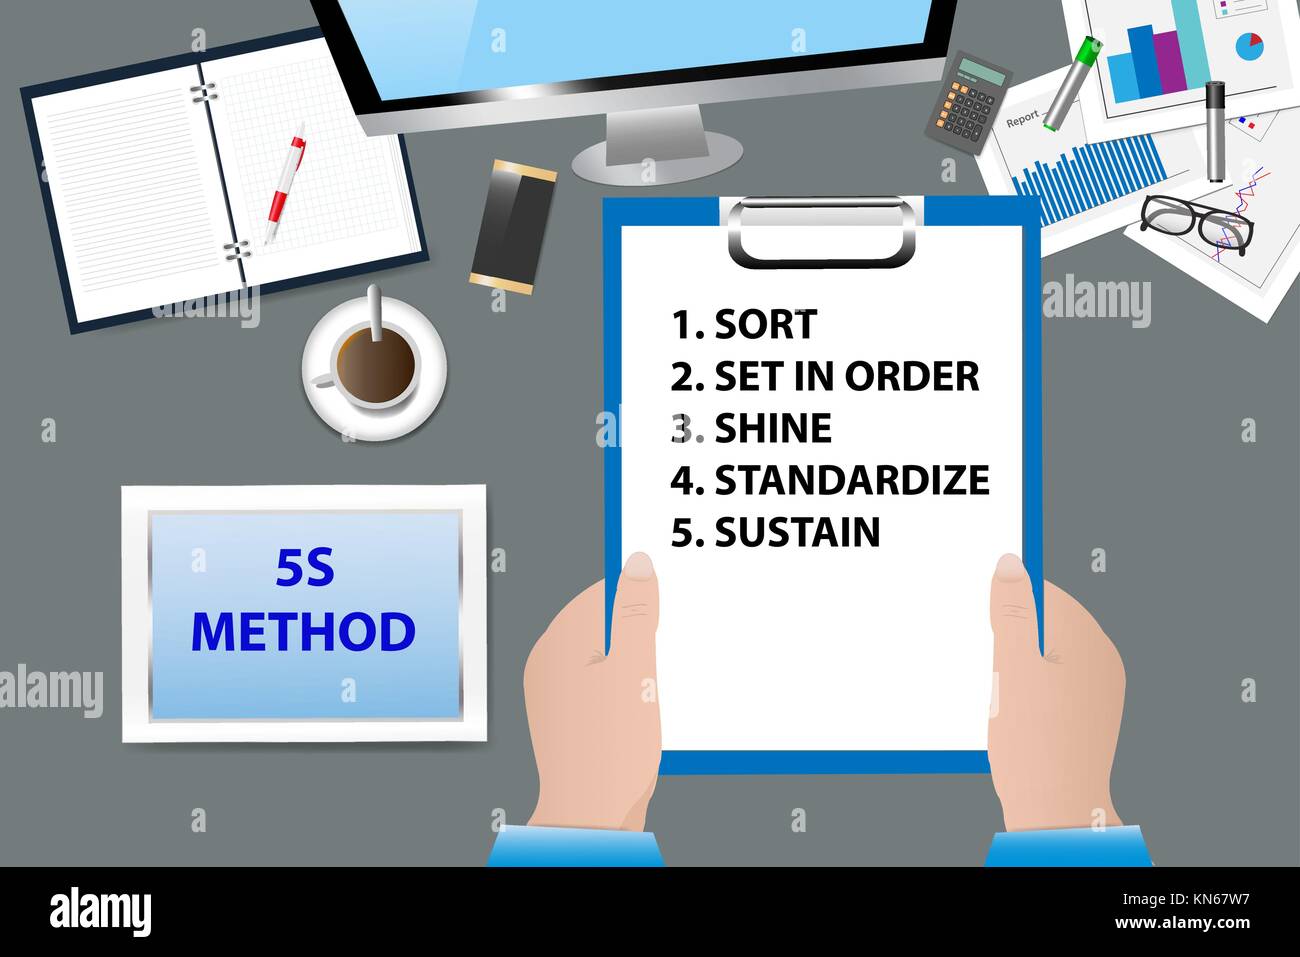 Top view of the office desk with office supplies. Hands are holding a paper with 5S Kaizen Method  text. All potential trademarks are removed. Stock Vector